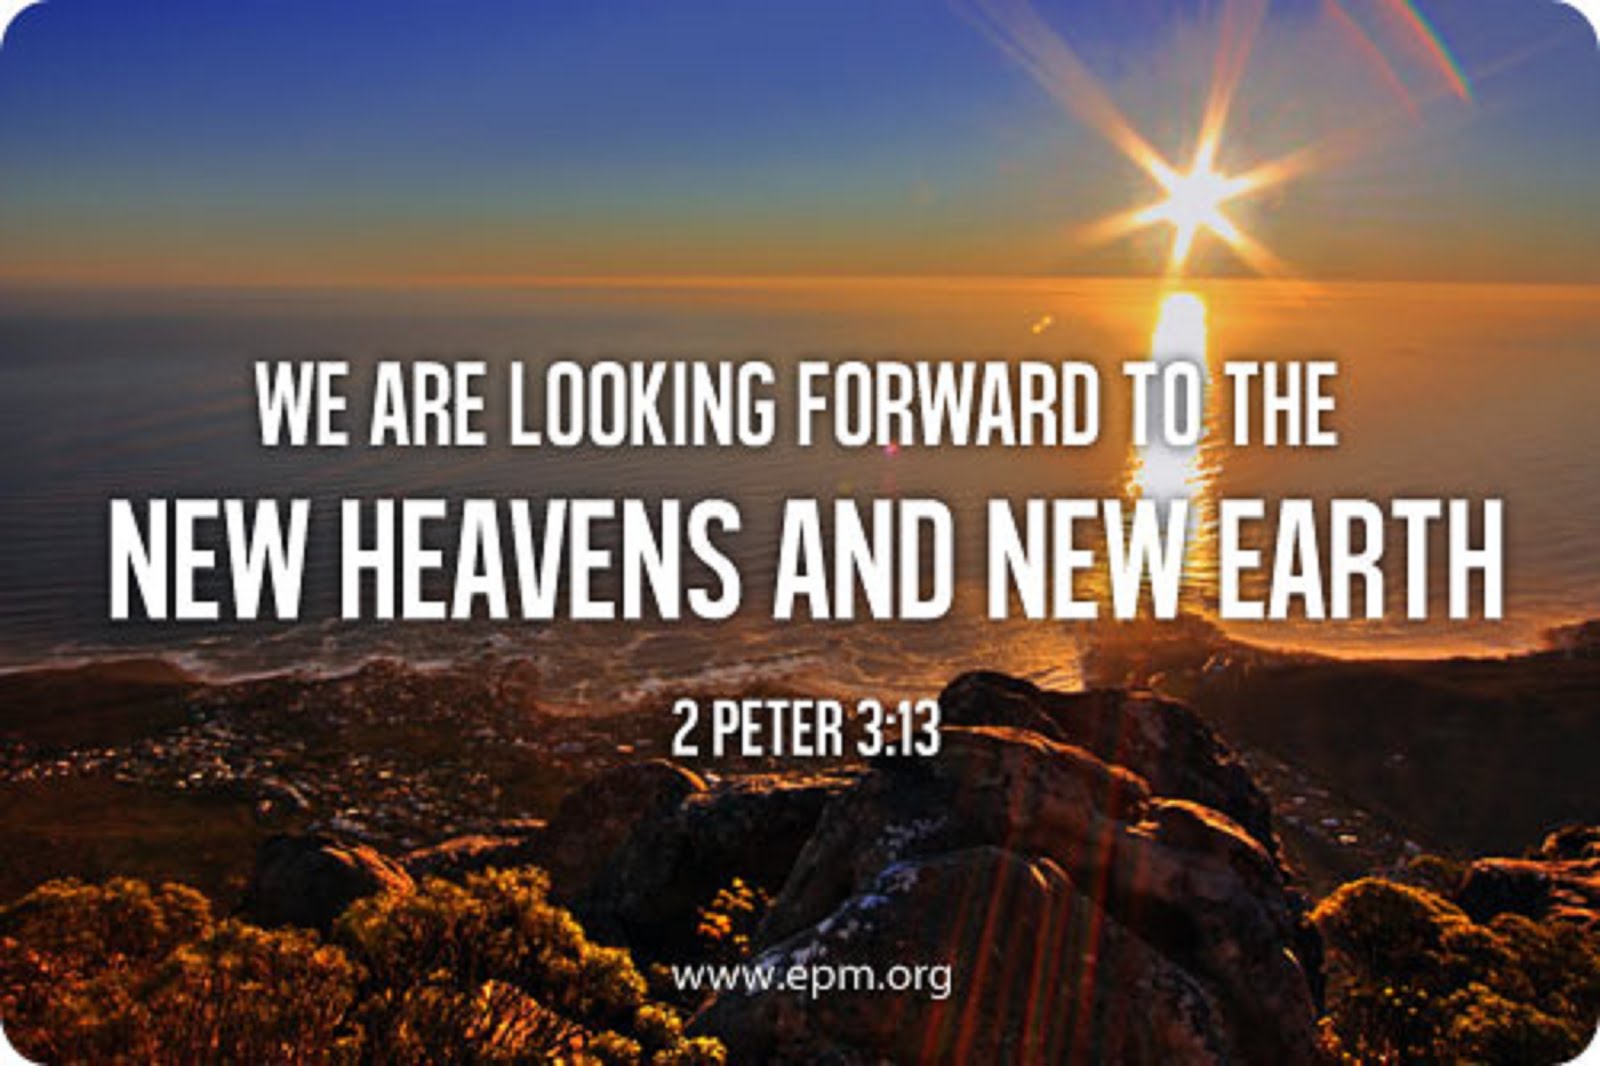 SO WE LOOK FORWARD TO THE NEW HEAVENS AND THE NEW EARTH